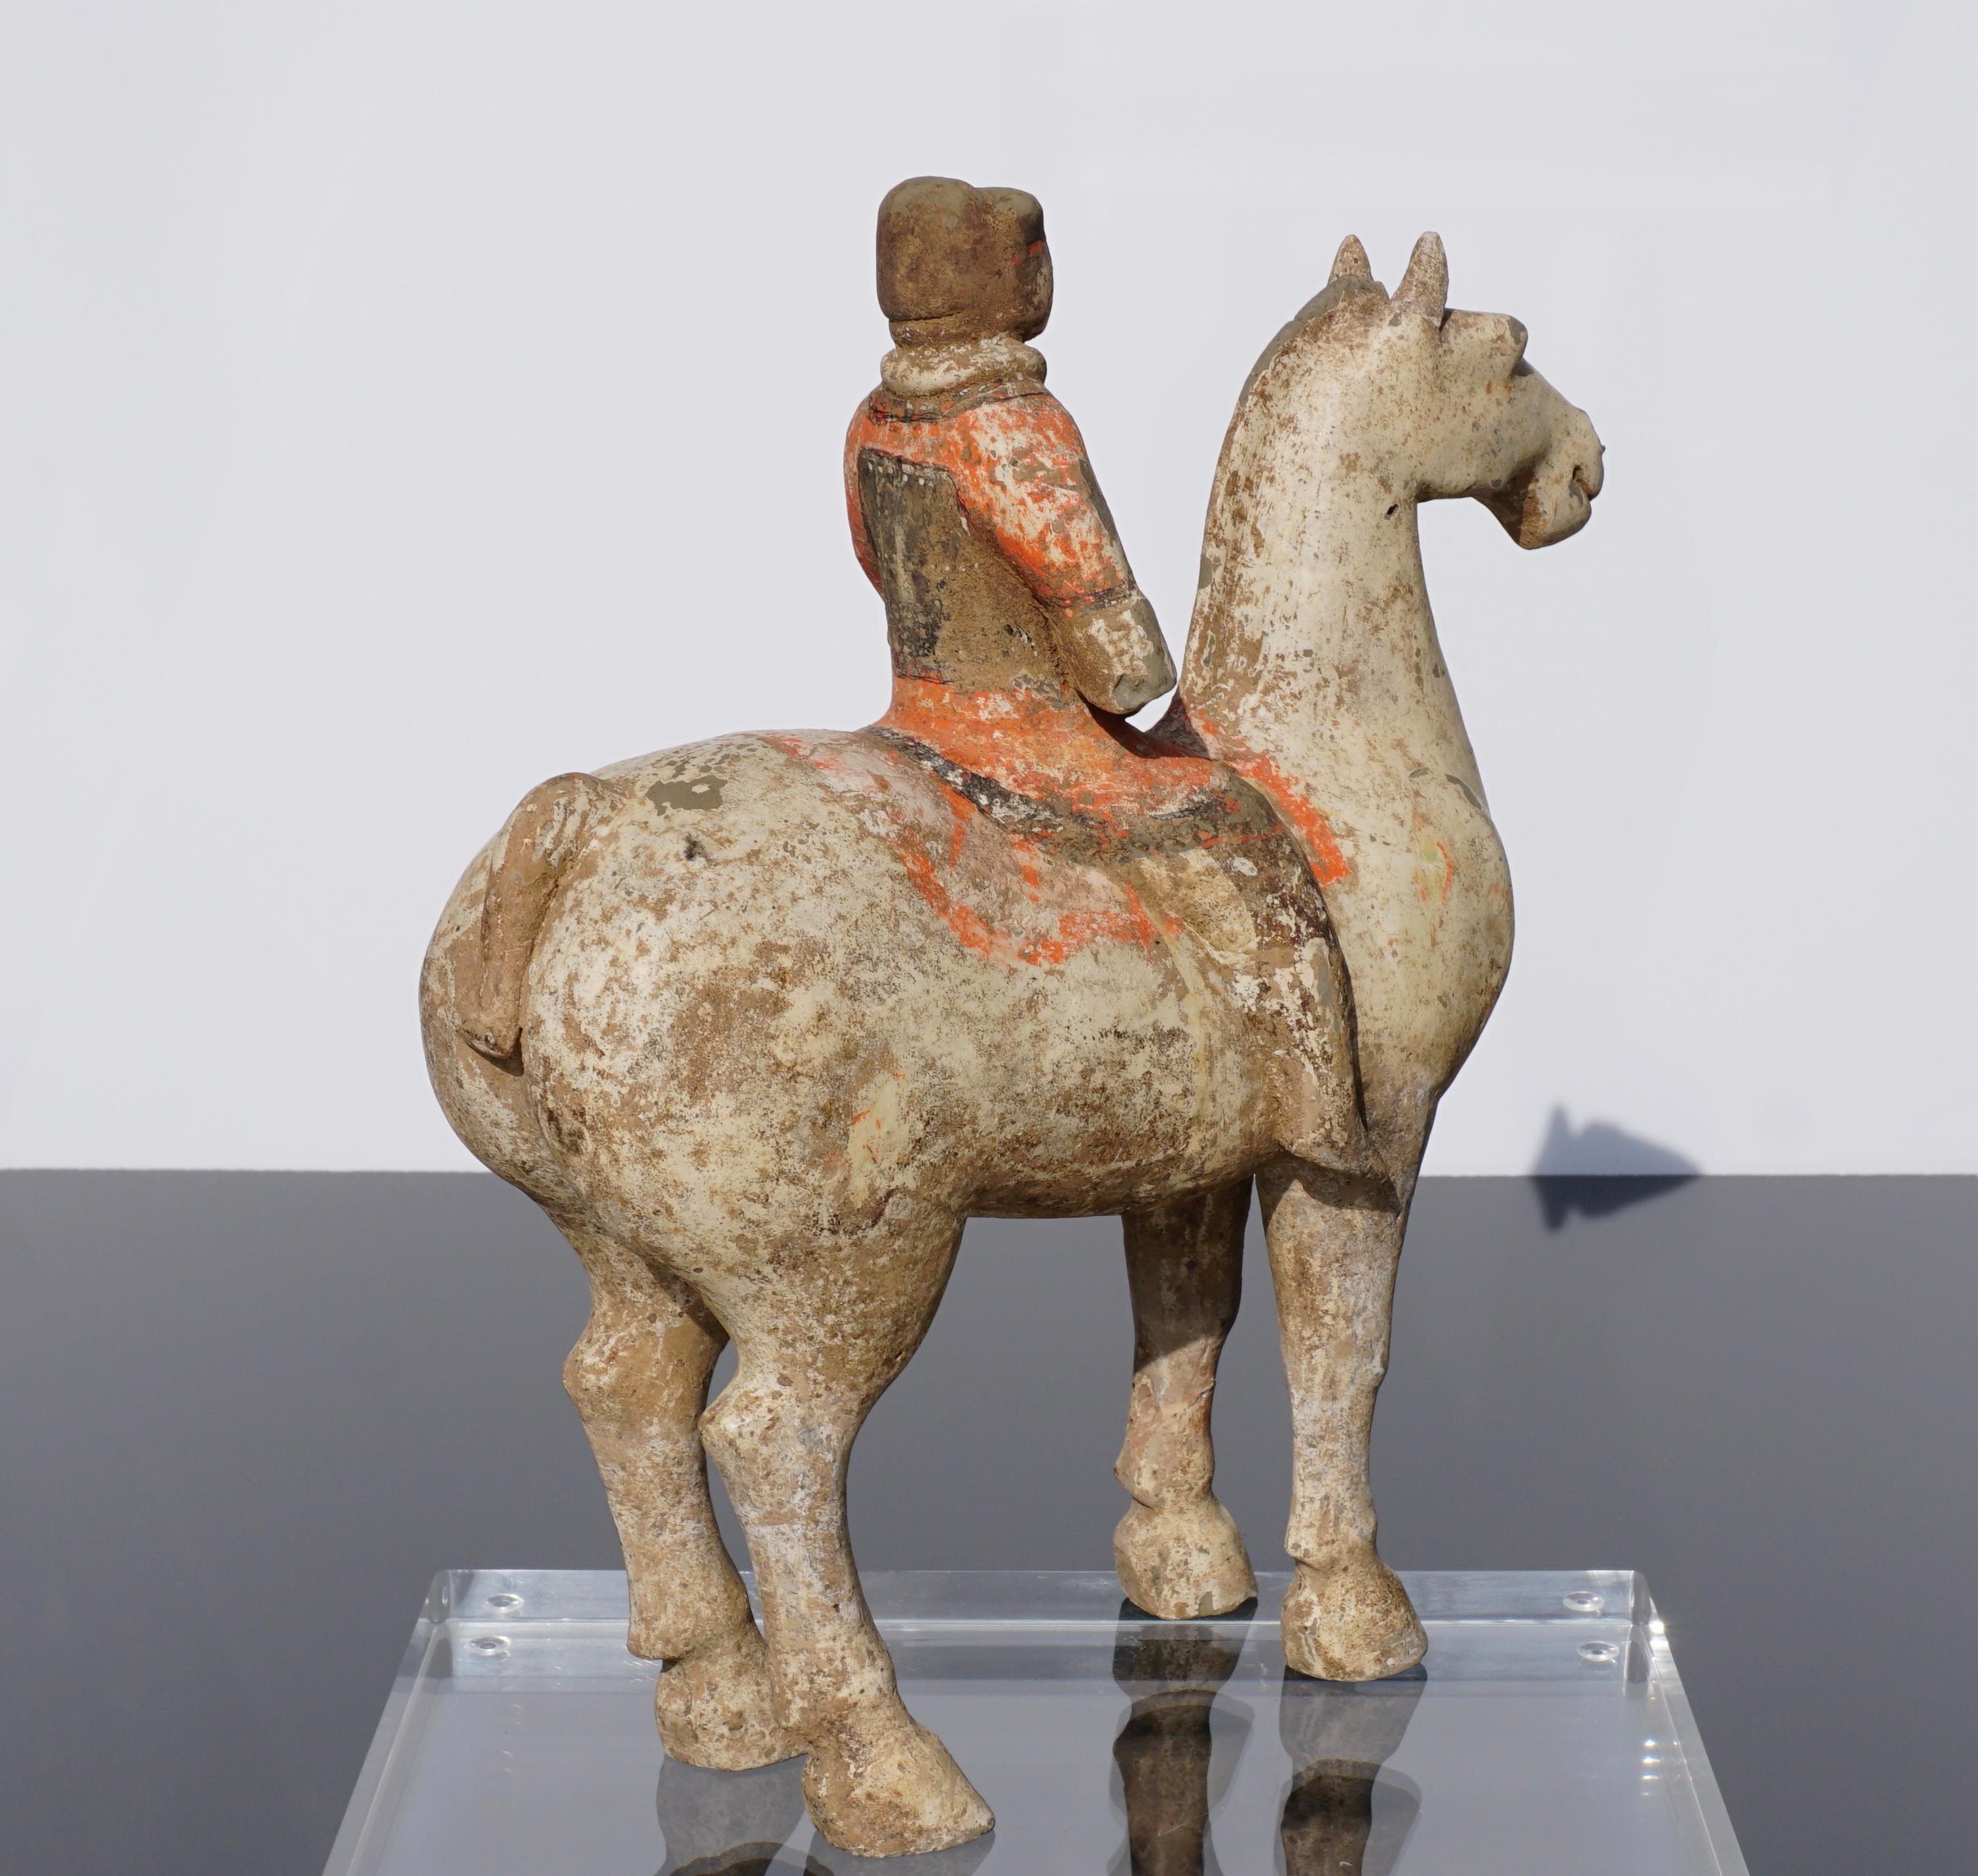 Han Dynasty Horse and Rider Terracotta, 206 BC-220 AD 4